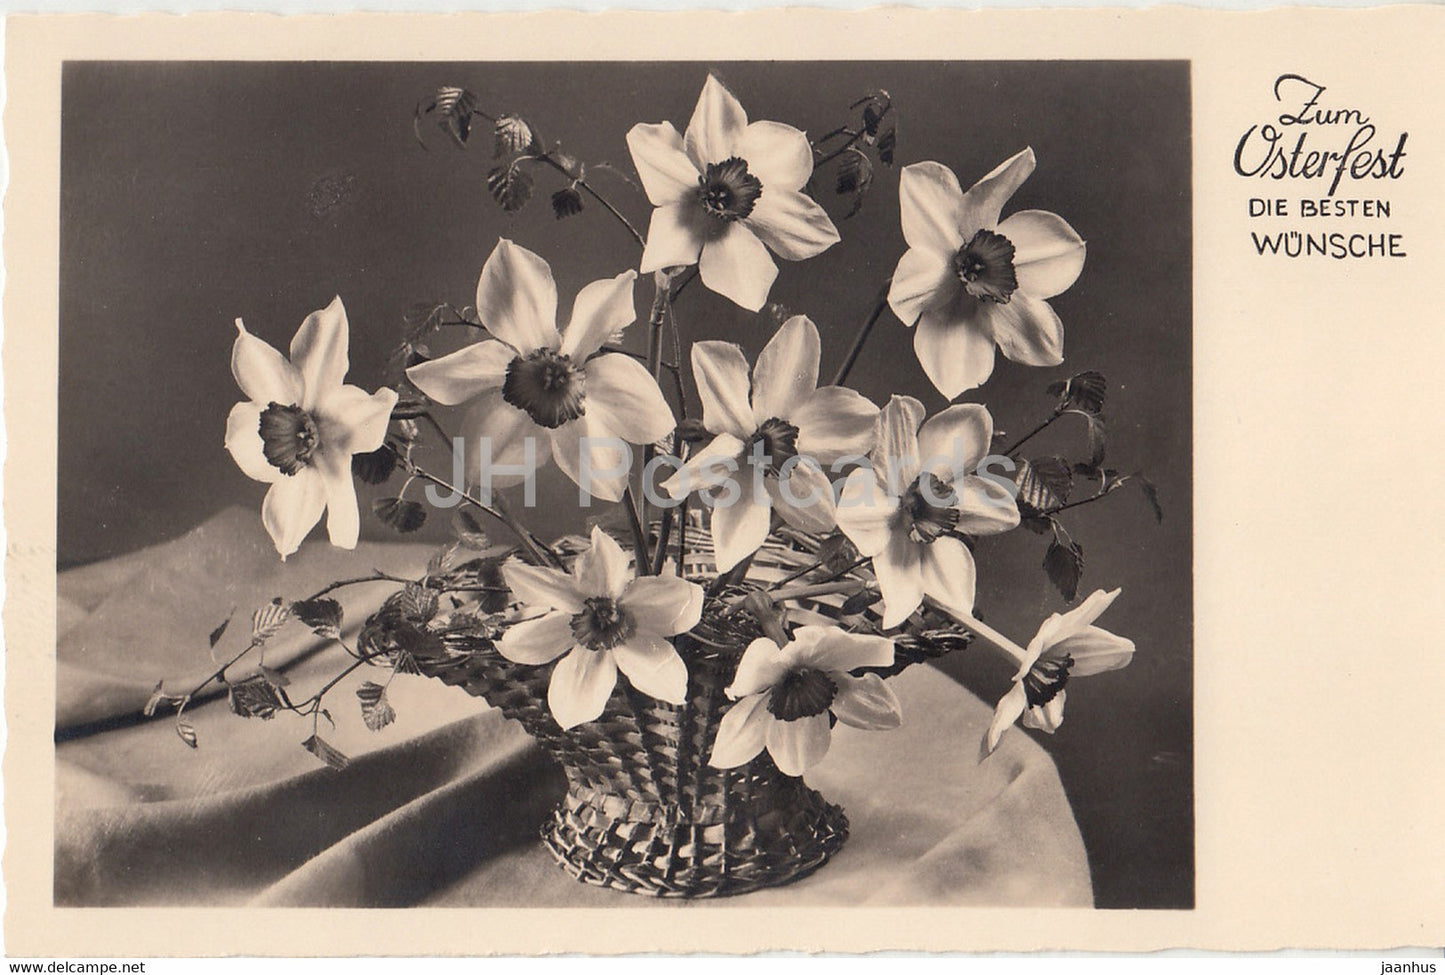 Easter Greeting Card - Zum Osterfest die Besten Wunsche - EAS 8727 - old postcard - 1942 - Germany - used - JH Postcards